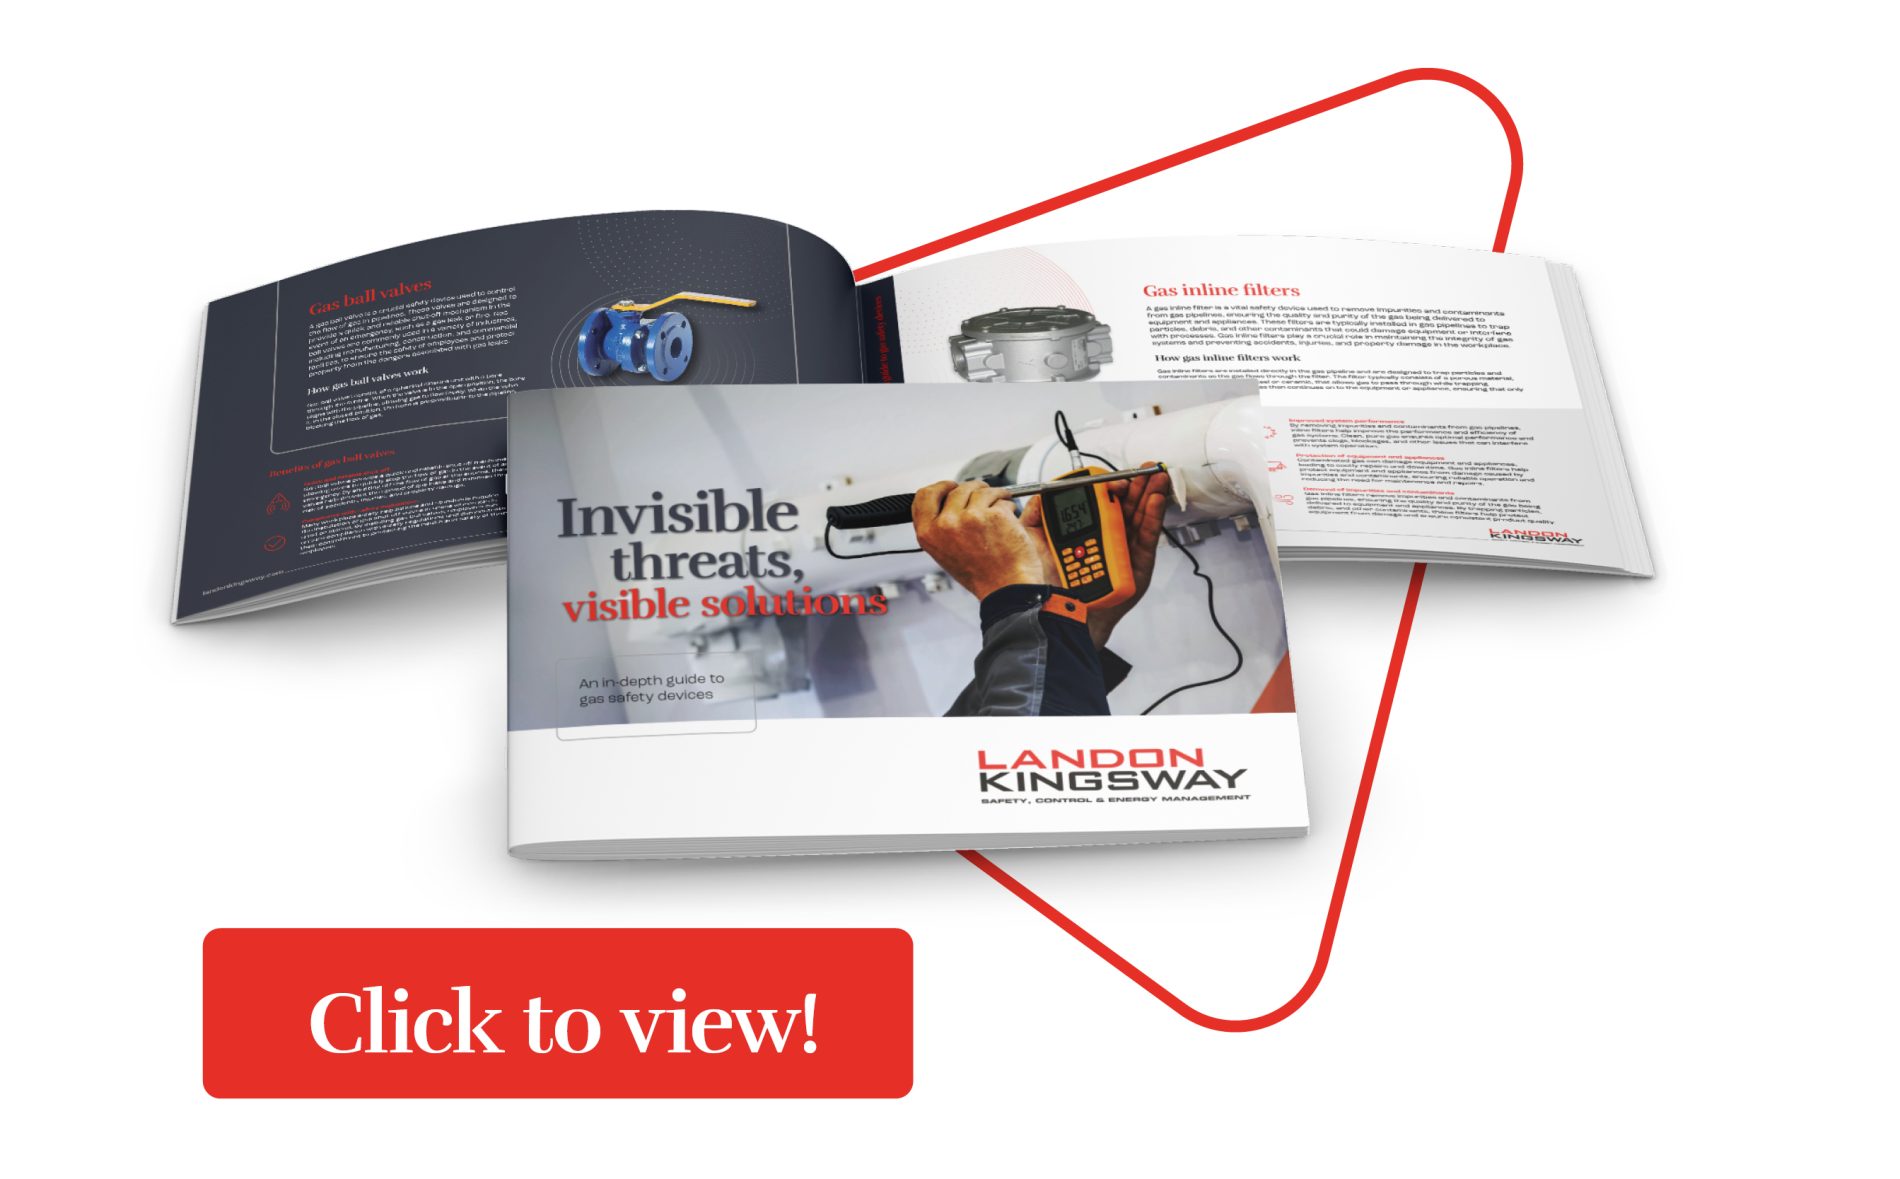 Invisible threats, visible solutions: A guide to gas safety devices Landon Kingsway